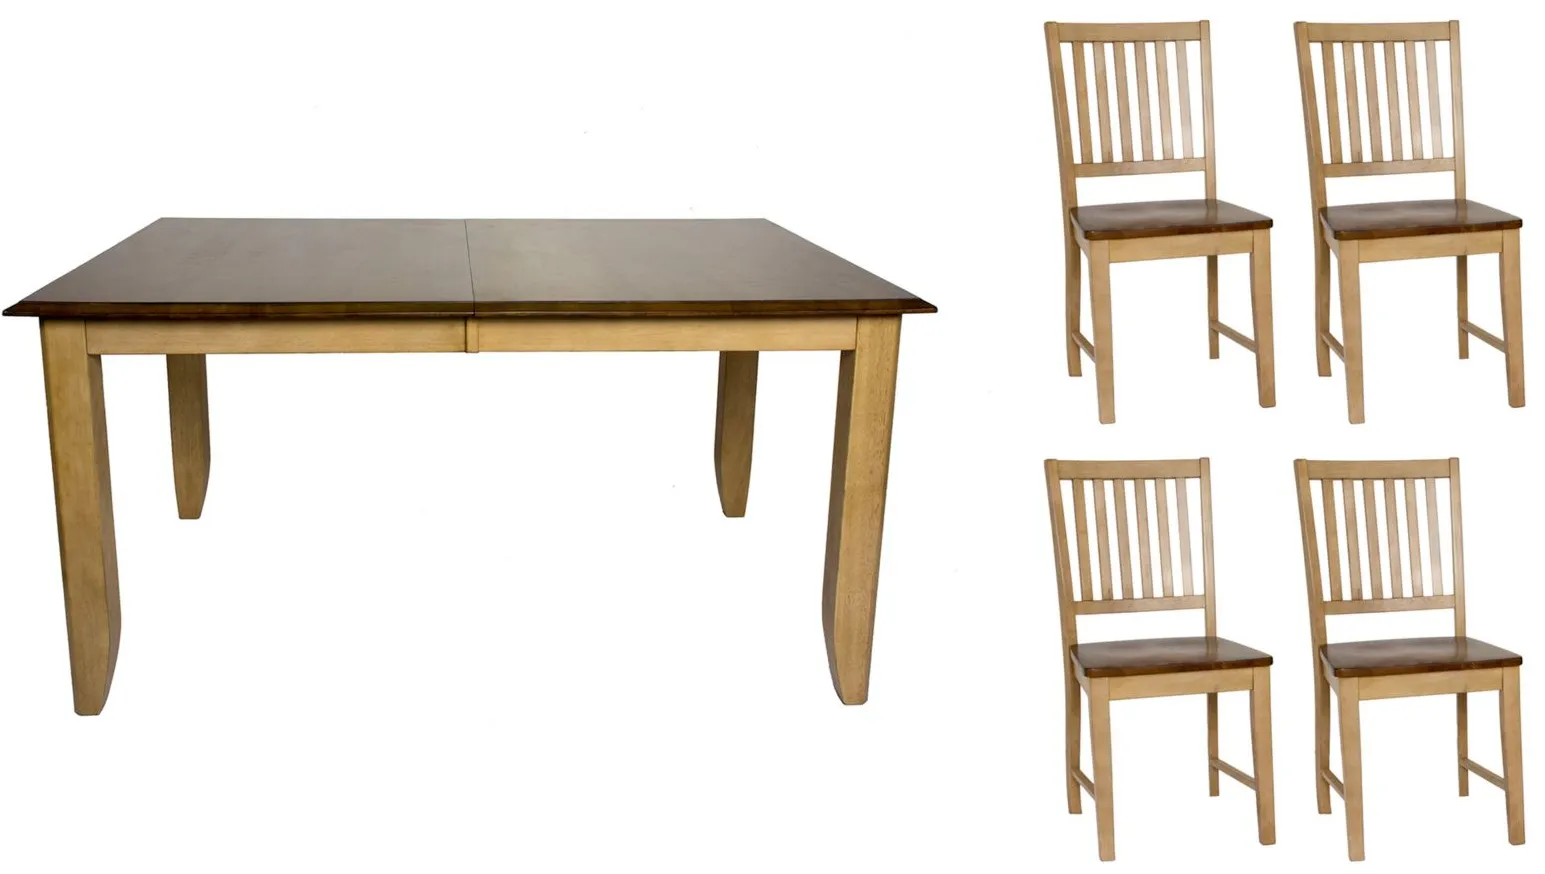 Brook 5-pc. Dining Set w/ Slat Back Chairs in Wheat and Pecan by Sunset Trading